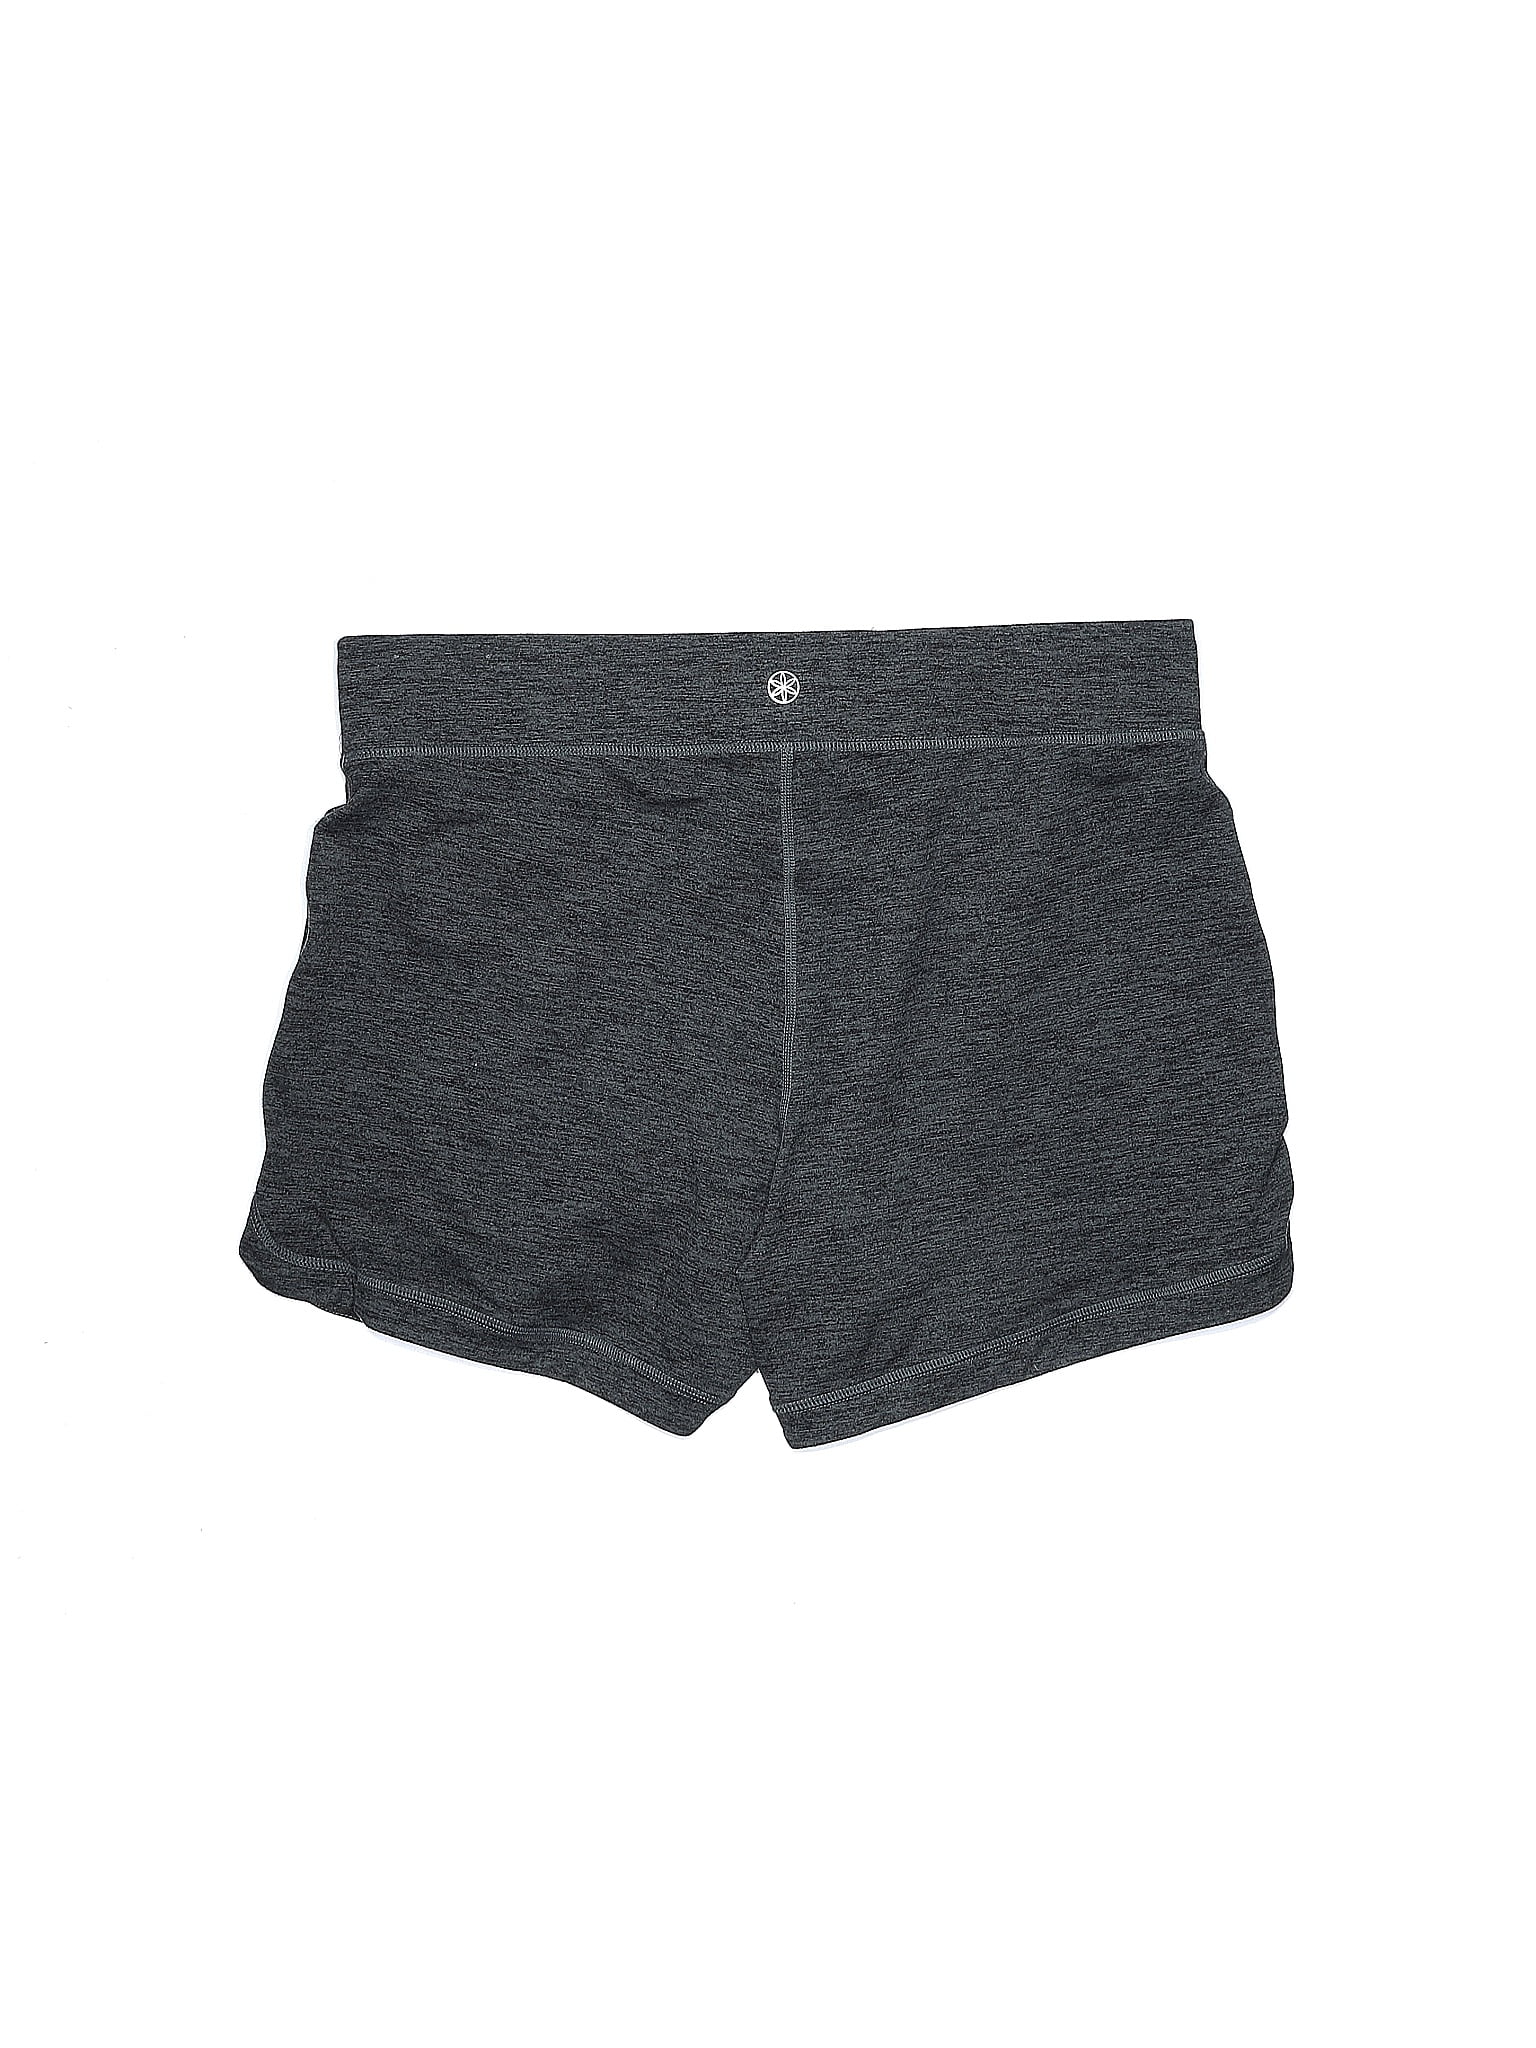 GAIAM Gray Athletic Shorts Size L - 28% off